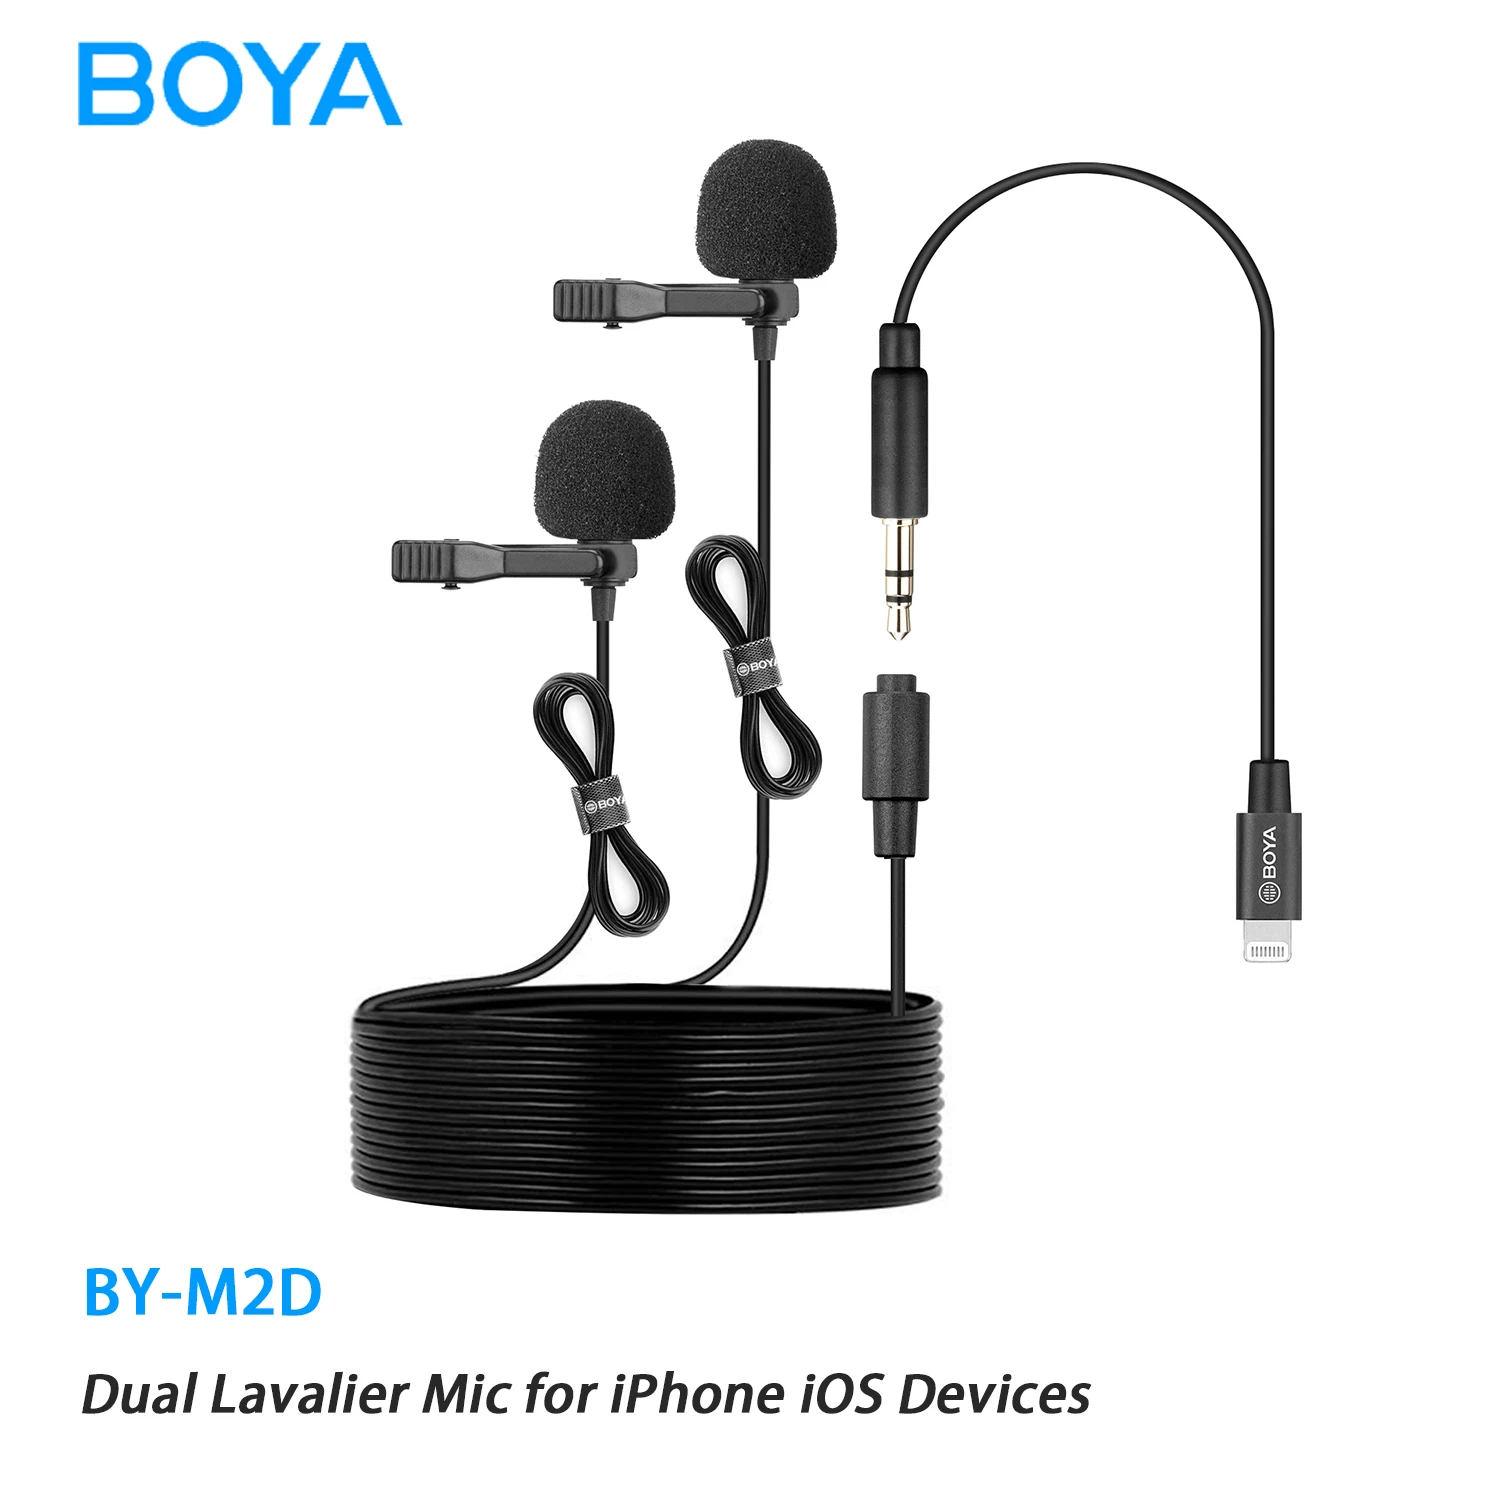 BOYA BY-M2D Dual Lavalier Microphone Portable 6m Mini Lapel Mic for iPhone Smartphones iPad Live Streaming Vlog Live Broadcast